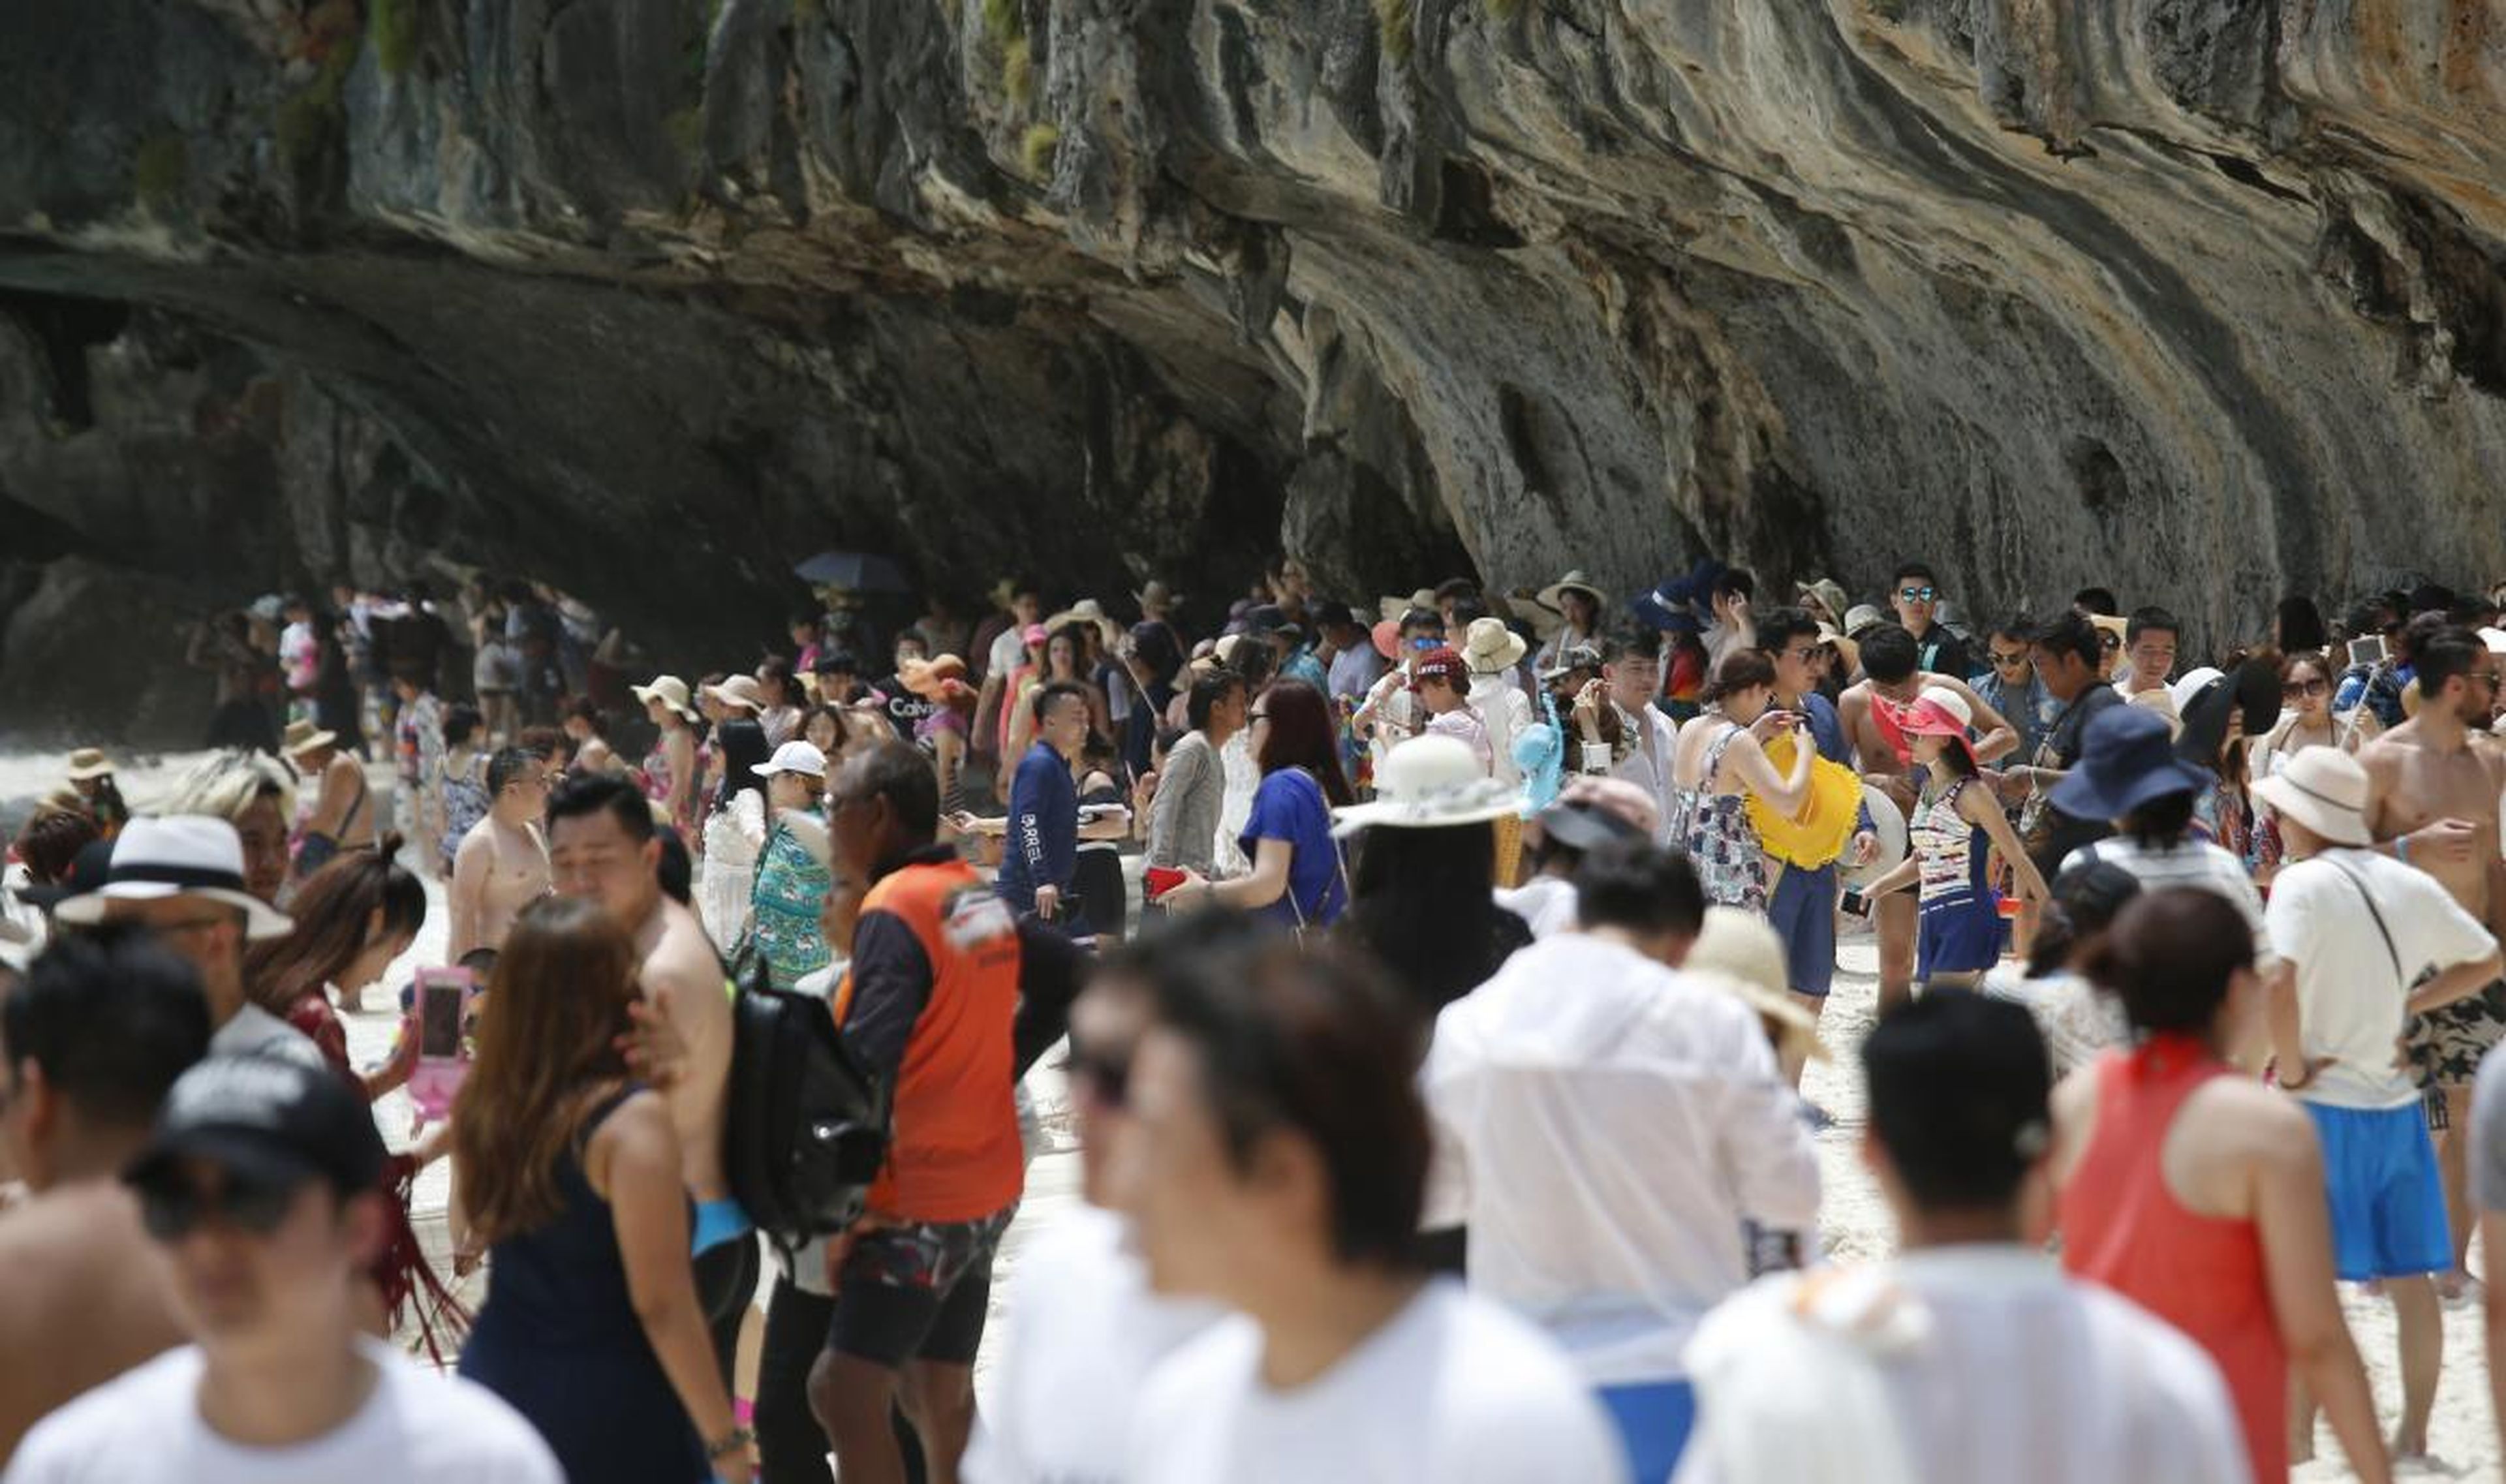 Too many tourists damaging the environment has led Thailand's Maya Bay to be closed.